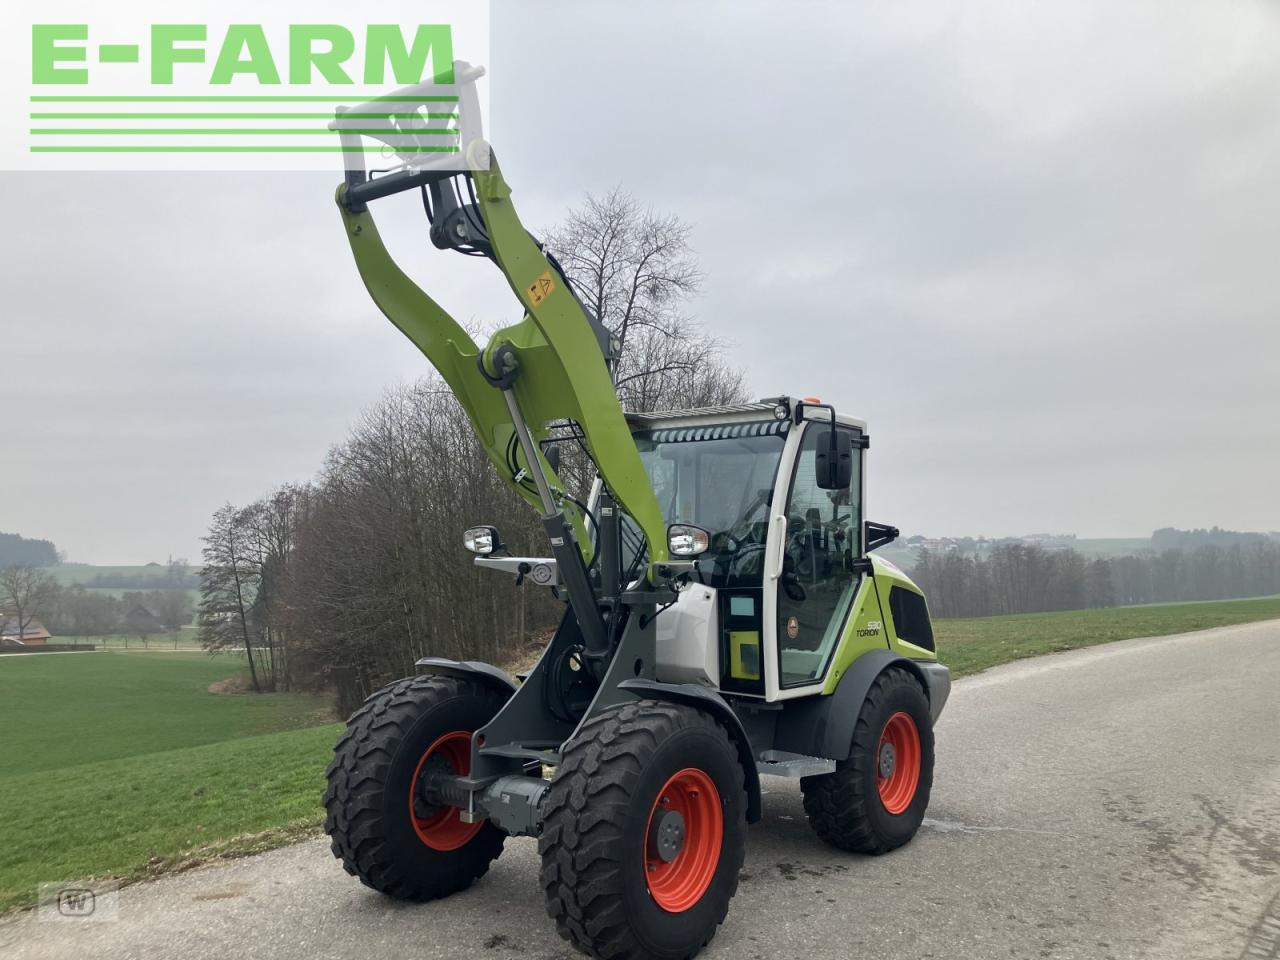 Farm tractor CLAAS torion 530